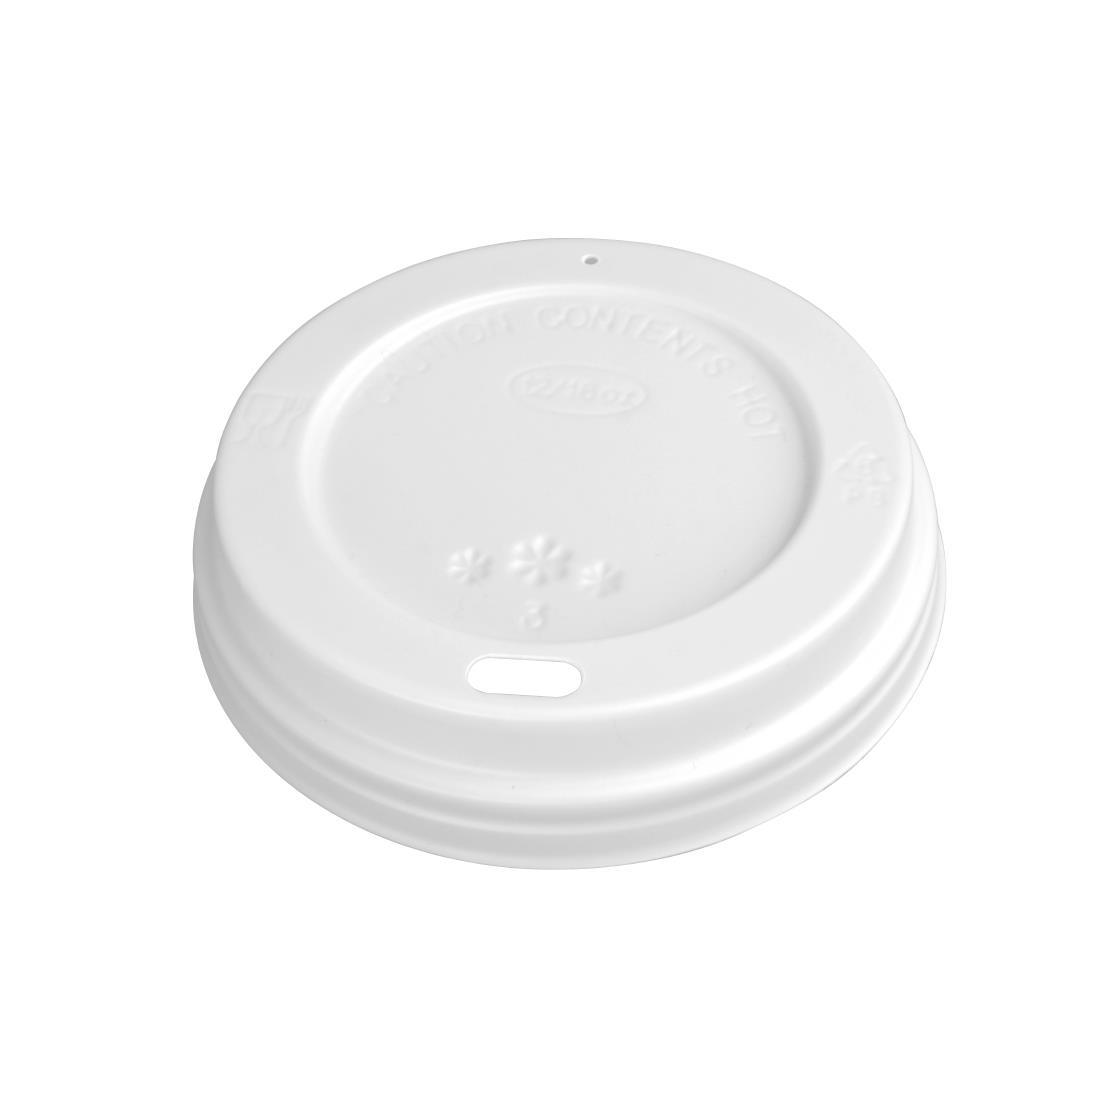 Fiesta Recyclable Coffee Cup Lids White 340ml / 12oz and 455ml / 16oz (Pack of 50) - CE264  - 2